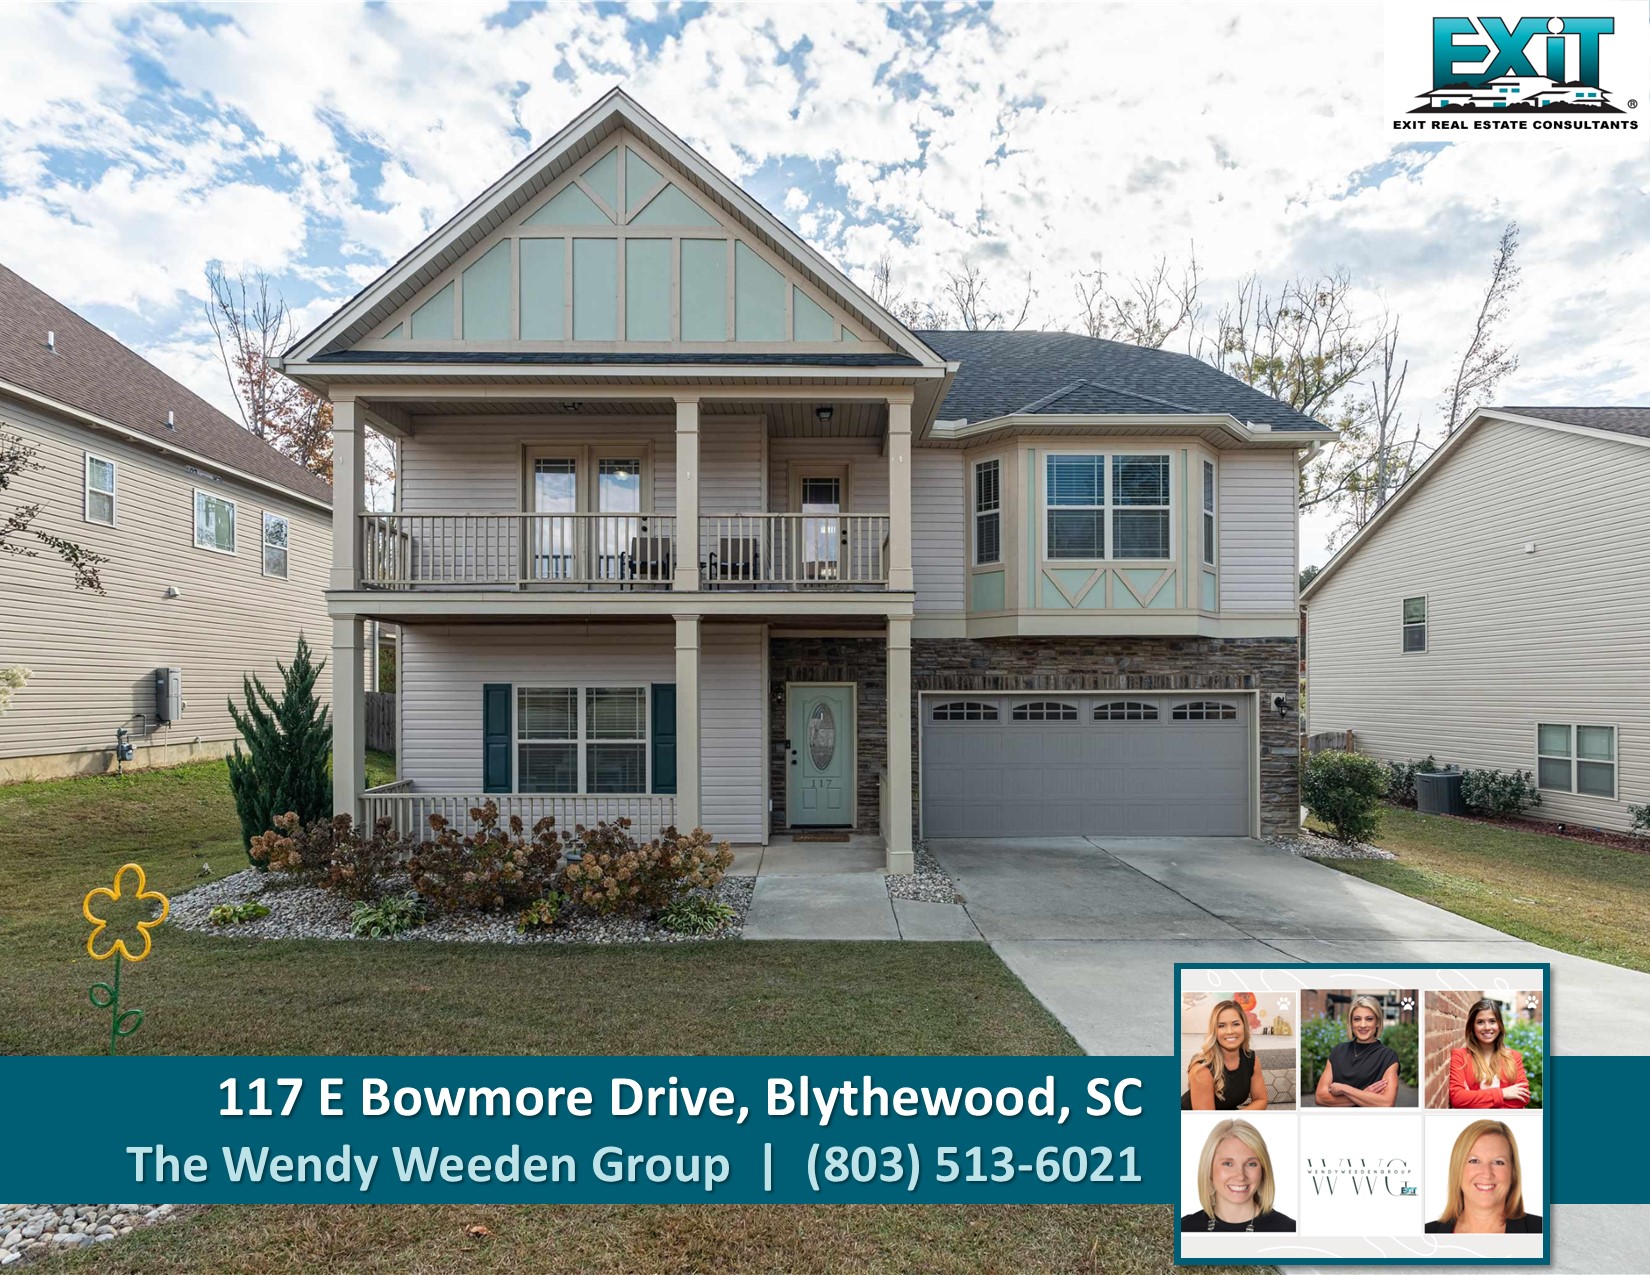 Just listed in Blythewood